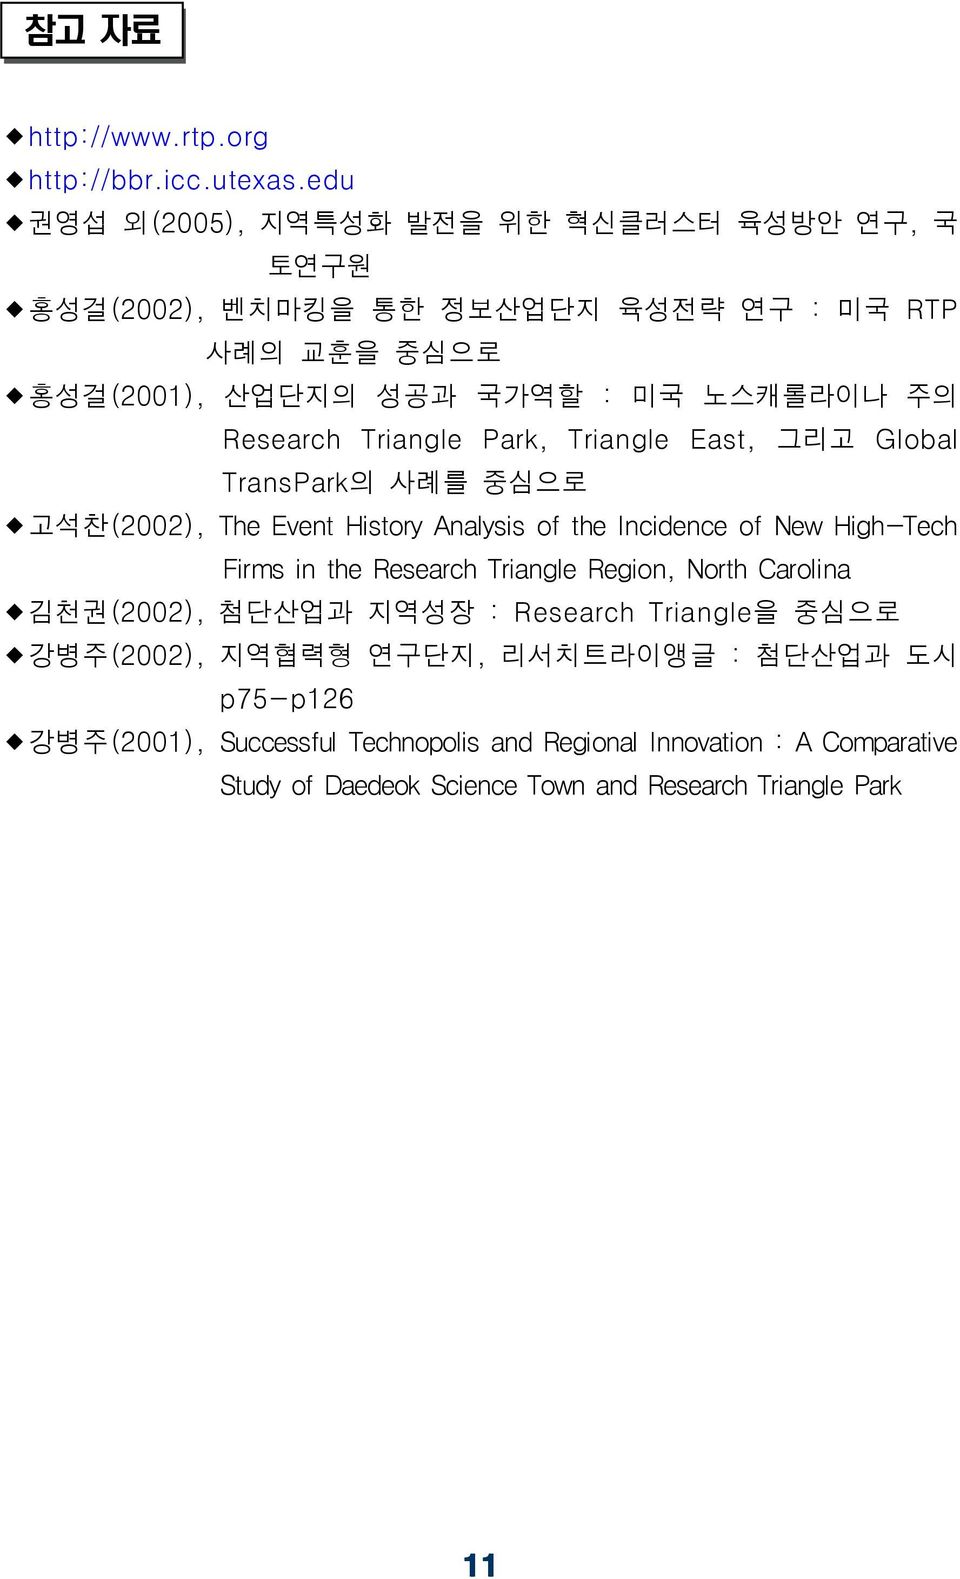 Research Triangle Park, Triangle East, TransPark의 사례를 중심으로 그리고 Global ꋮ고석찬(2002), The Event History Analysis of the Incidence of New HighTech Firms in the